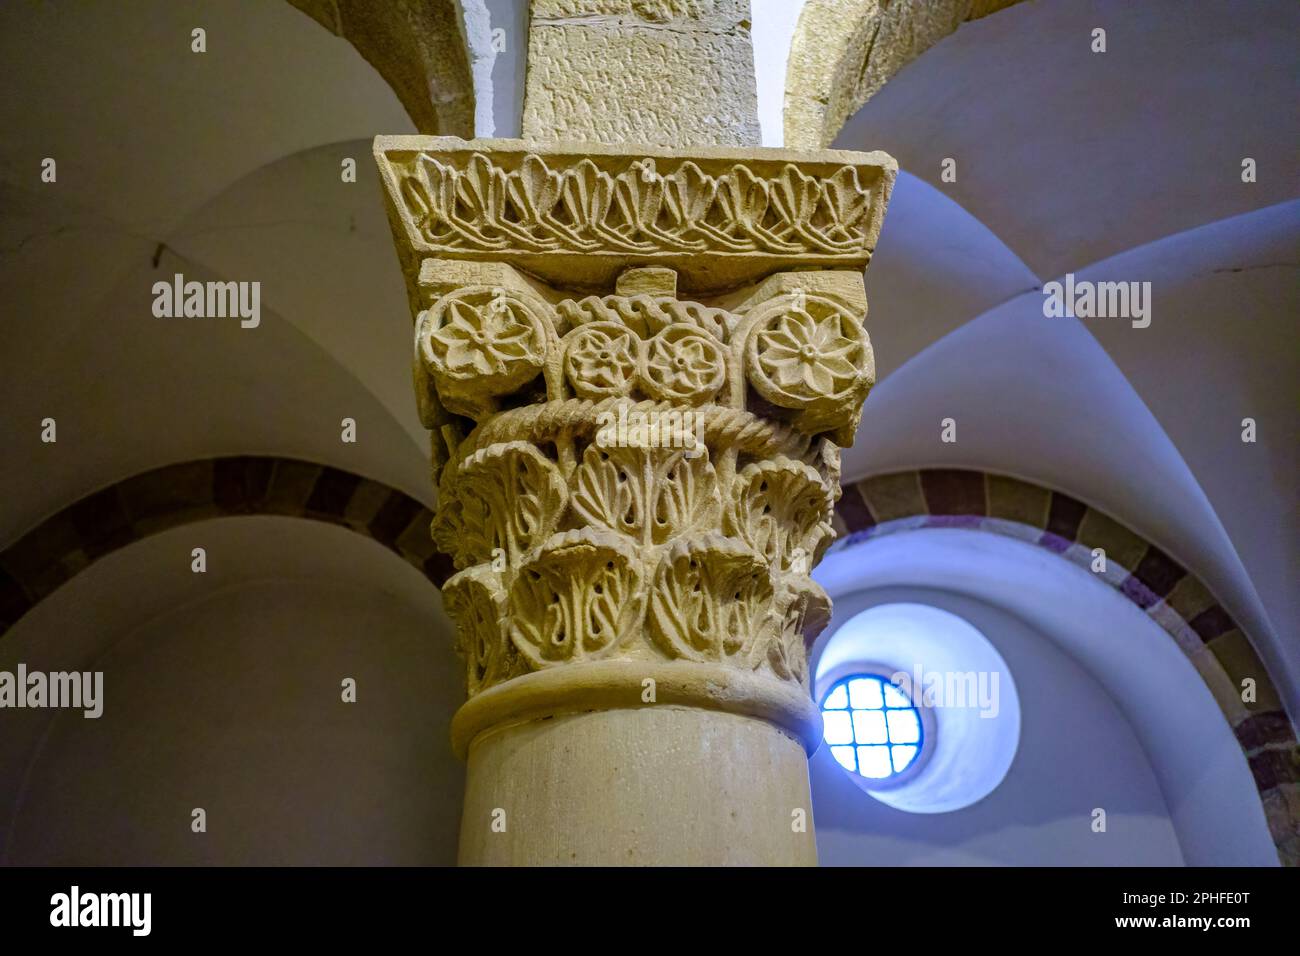 Column capital in the crypt of the Imperial Cathedral of Speyer, Rhineland-Palatinate, Germany, Europe. Stock Photo